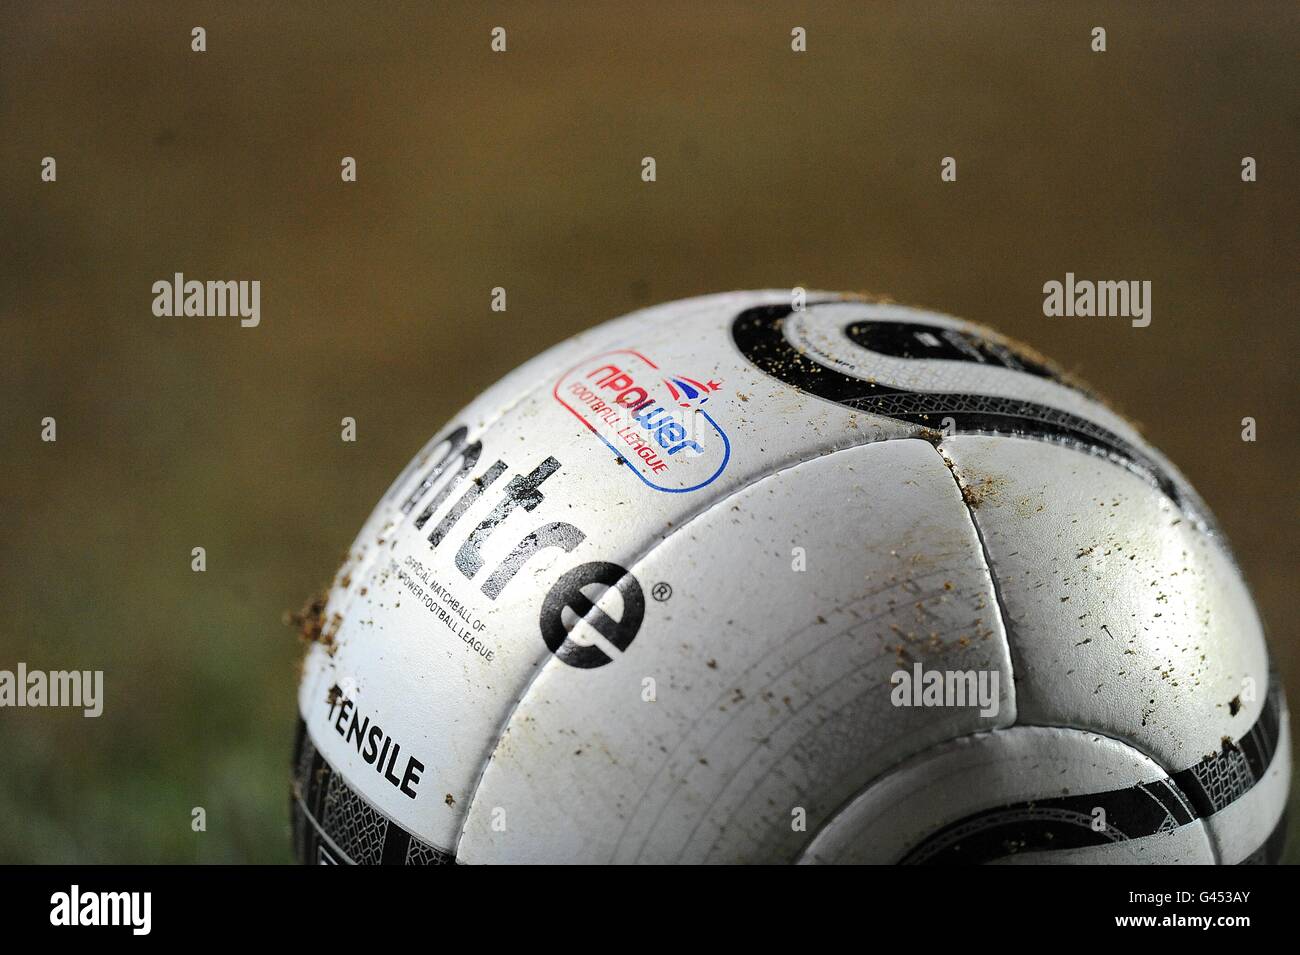 Detail of an official Milton Keynes Dons matchball on the pitch Stock Photo